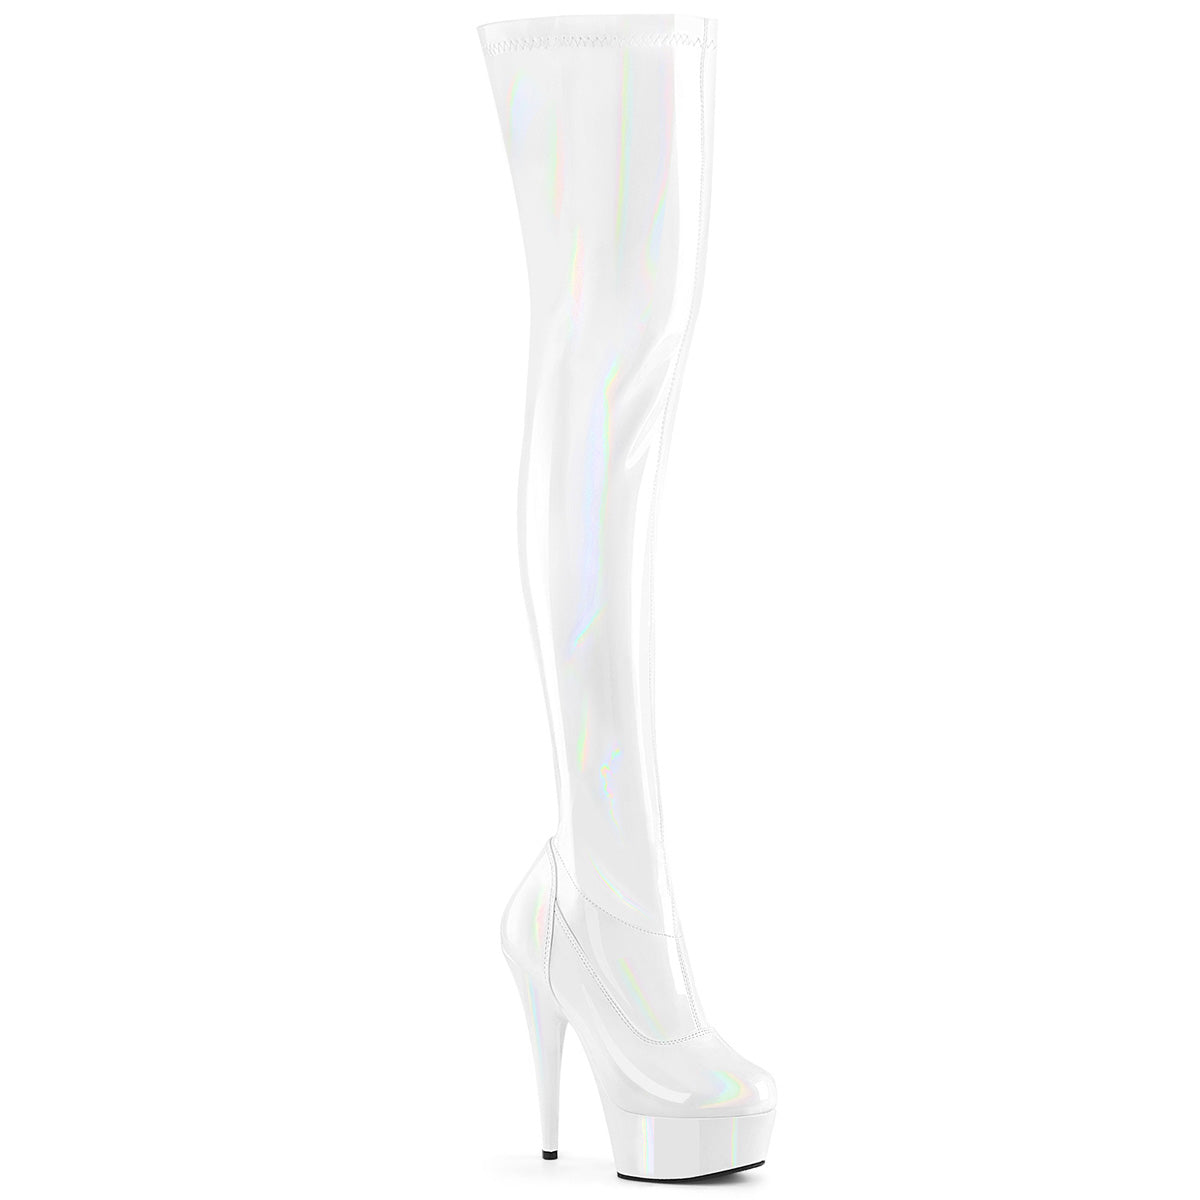 6 Inch Heel DELIGHT-3000HWR White Holo Patent